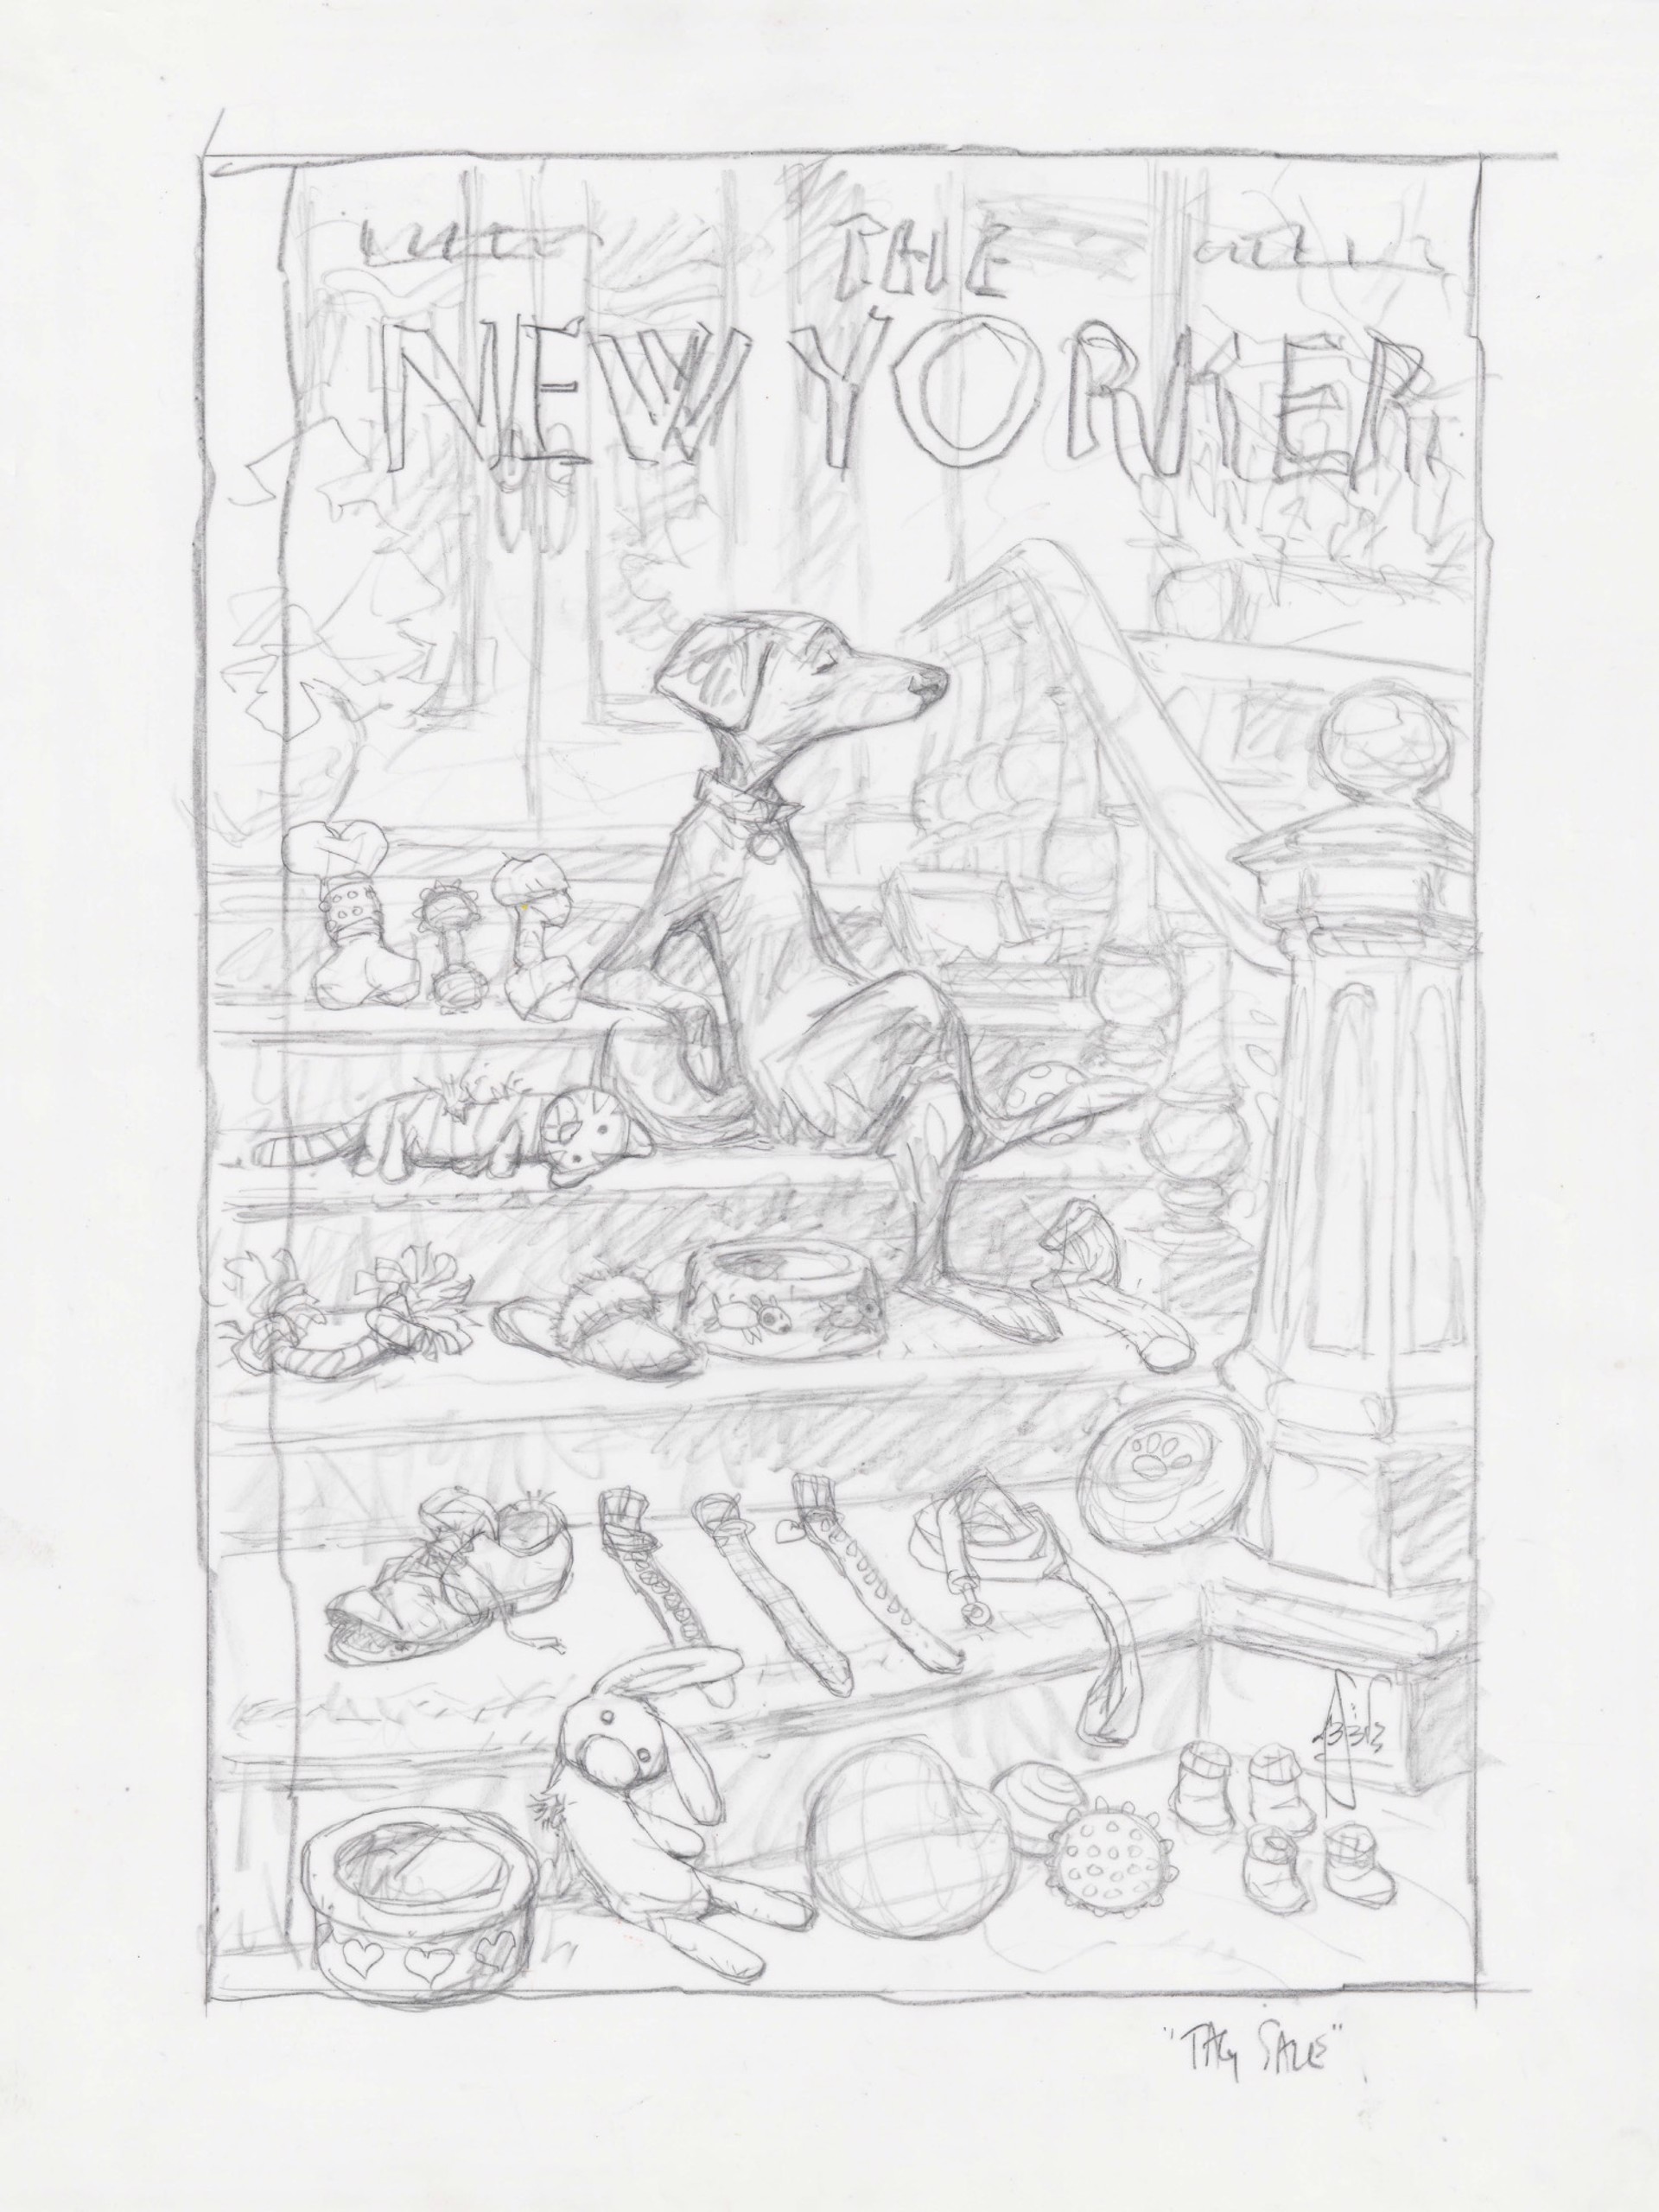 Proposed sketch for New Yorker Cover "Tag Sale" by Peter de Sève